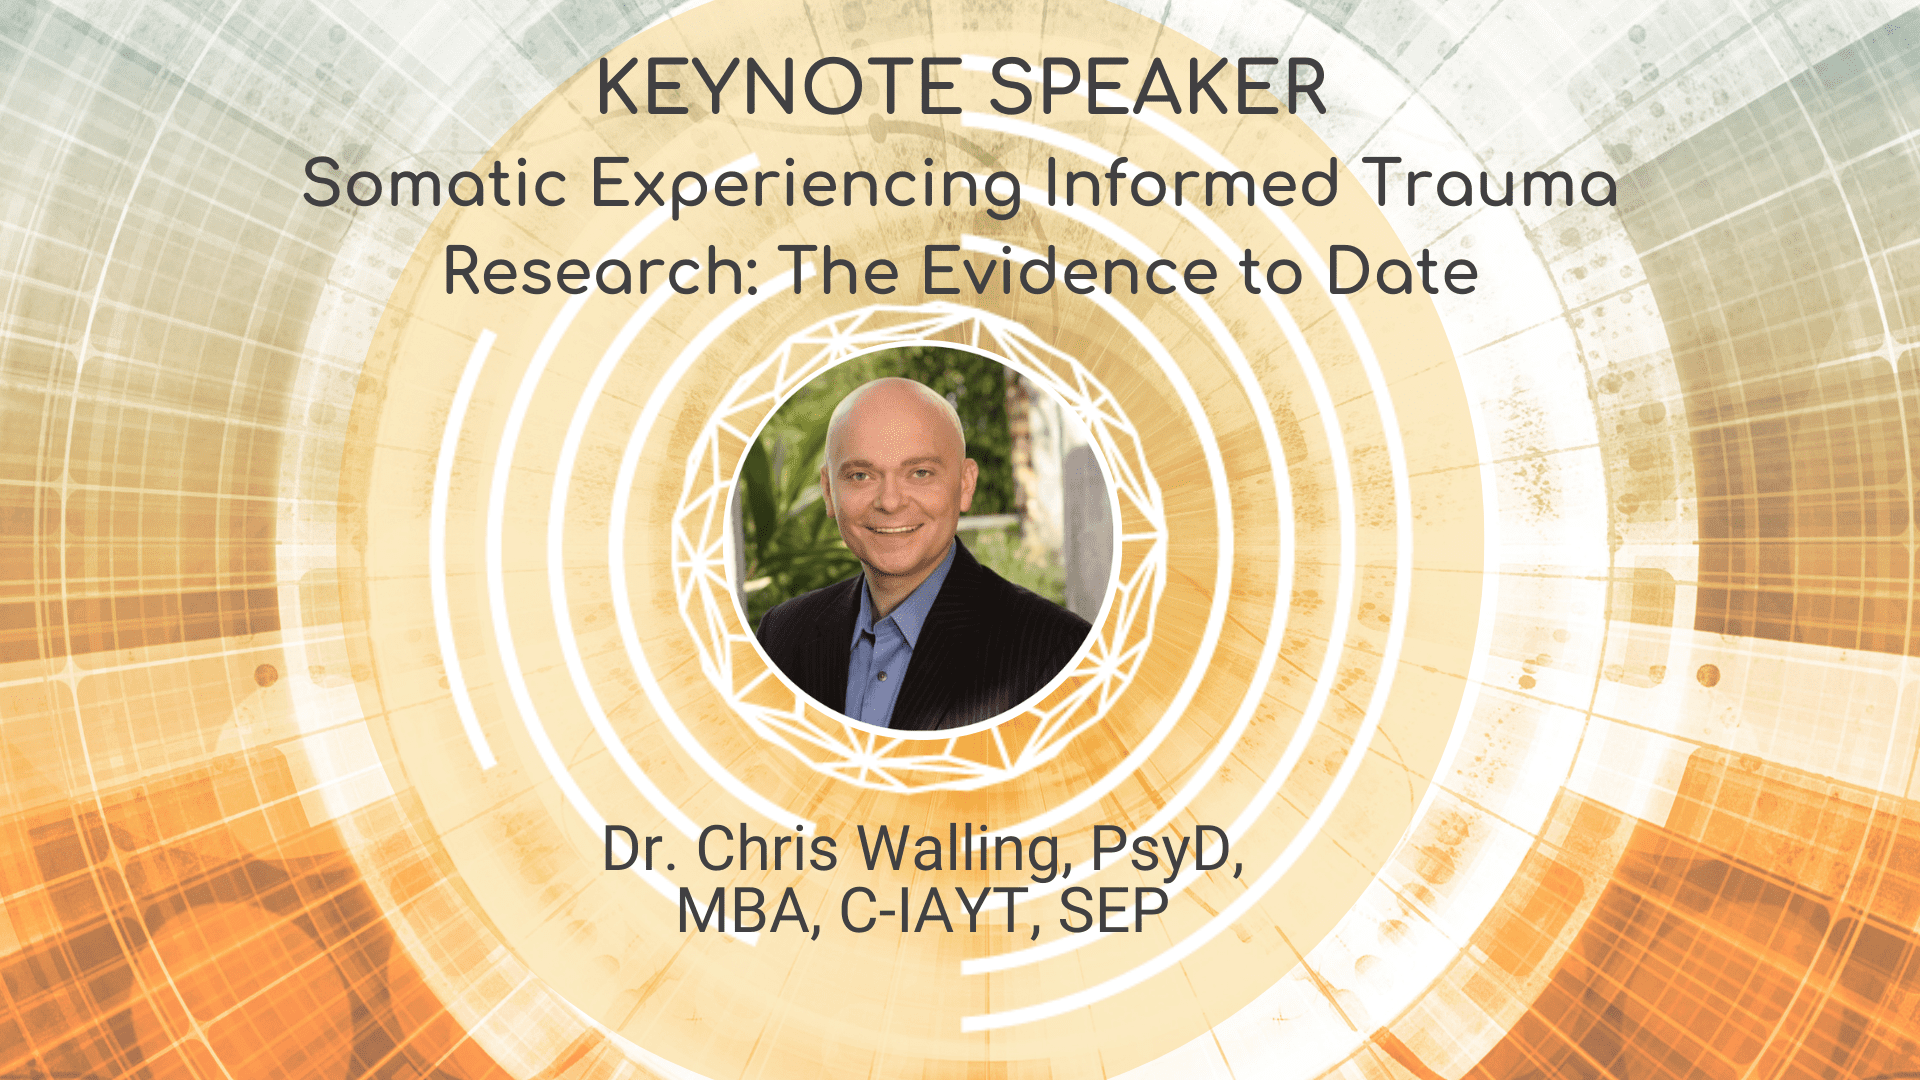 Somatic Experiencing Informed Trauma Research: The Evidence to Date – Dr. Chris Walling, PsyD, MBA, C-IAYT, SEP